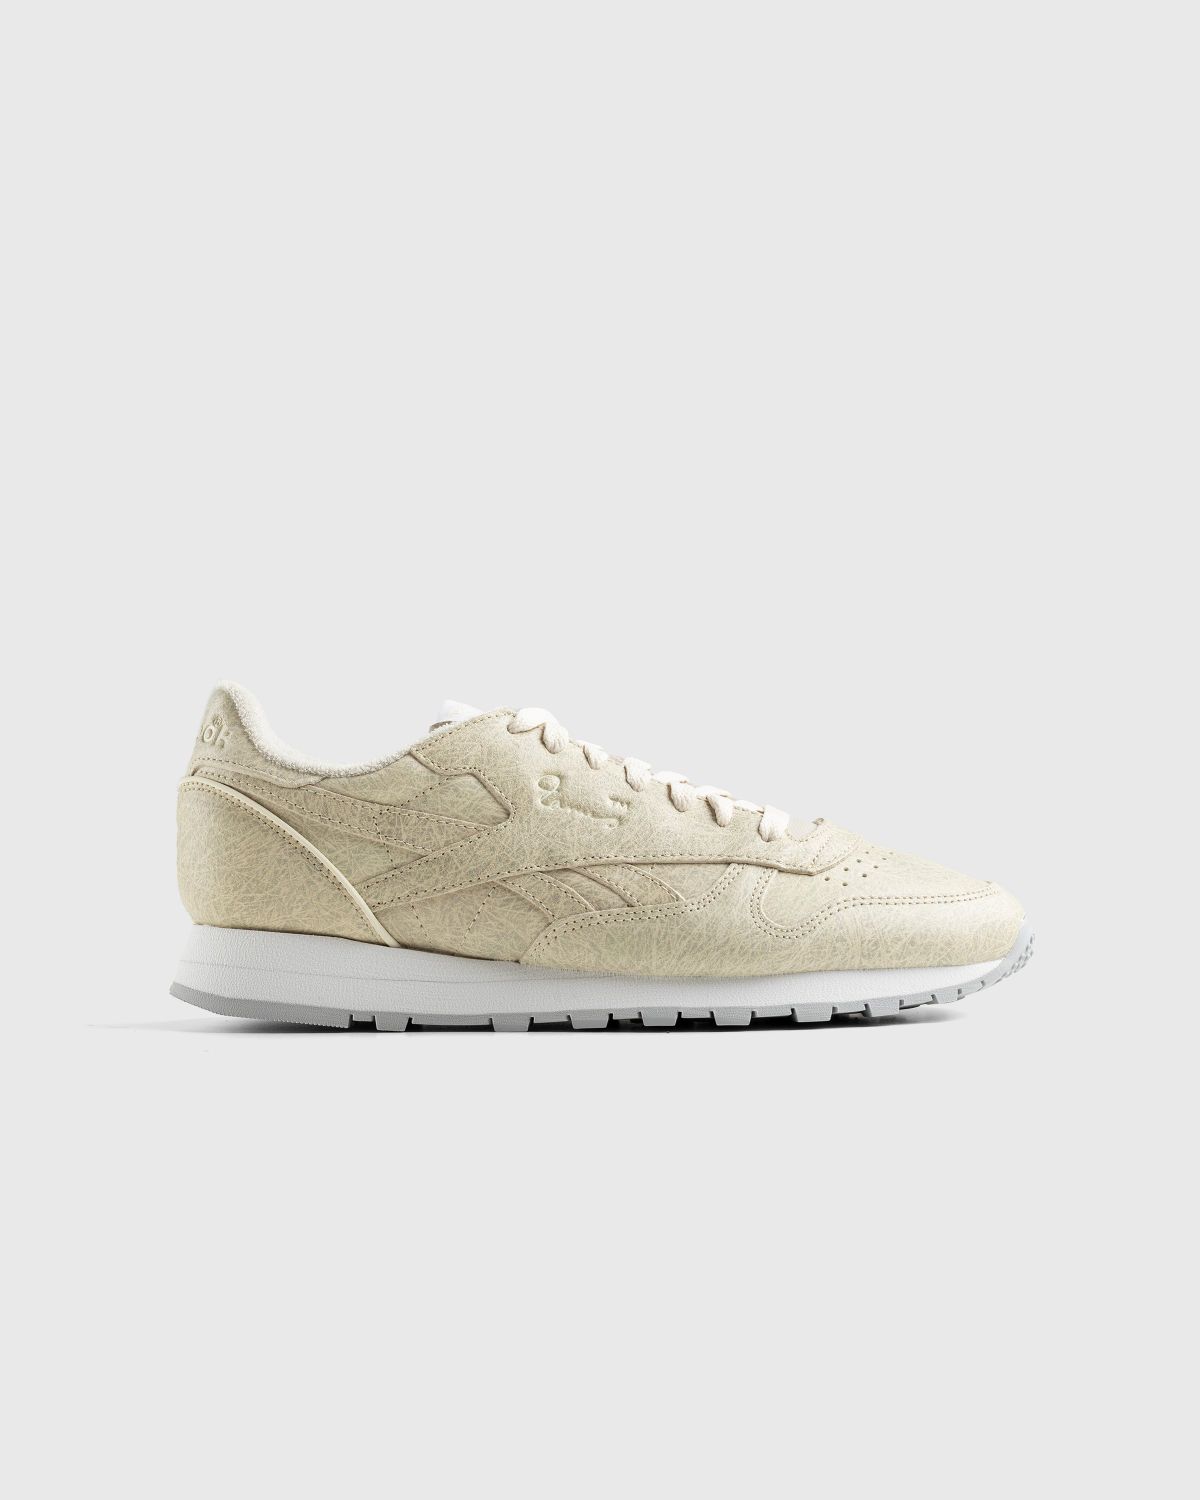 Reebok – Eames Classic Leather Sand - Low Top Sneakers - Beige - Image 1